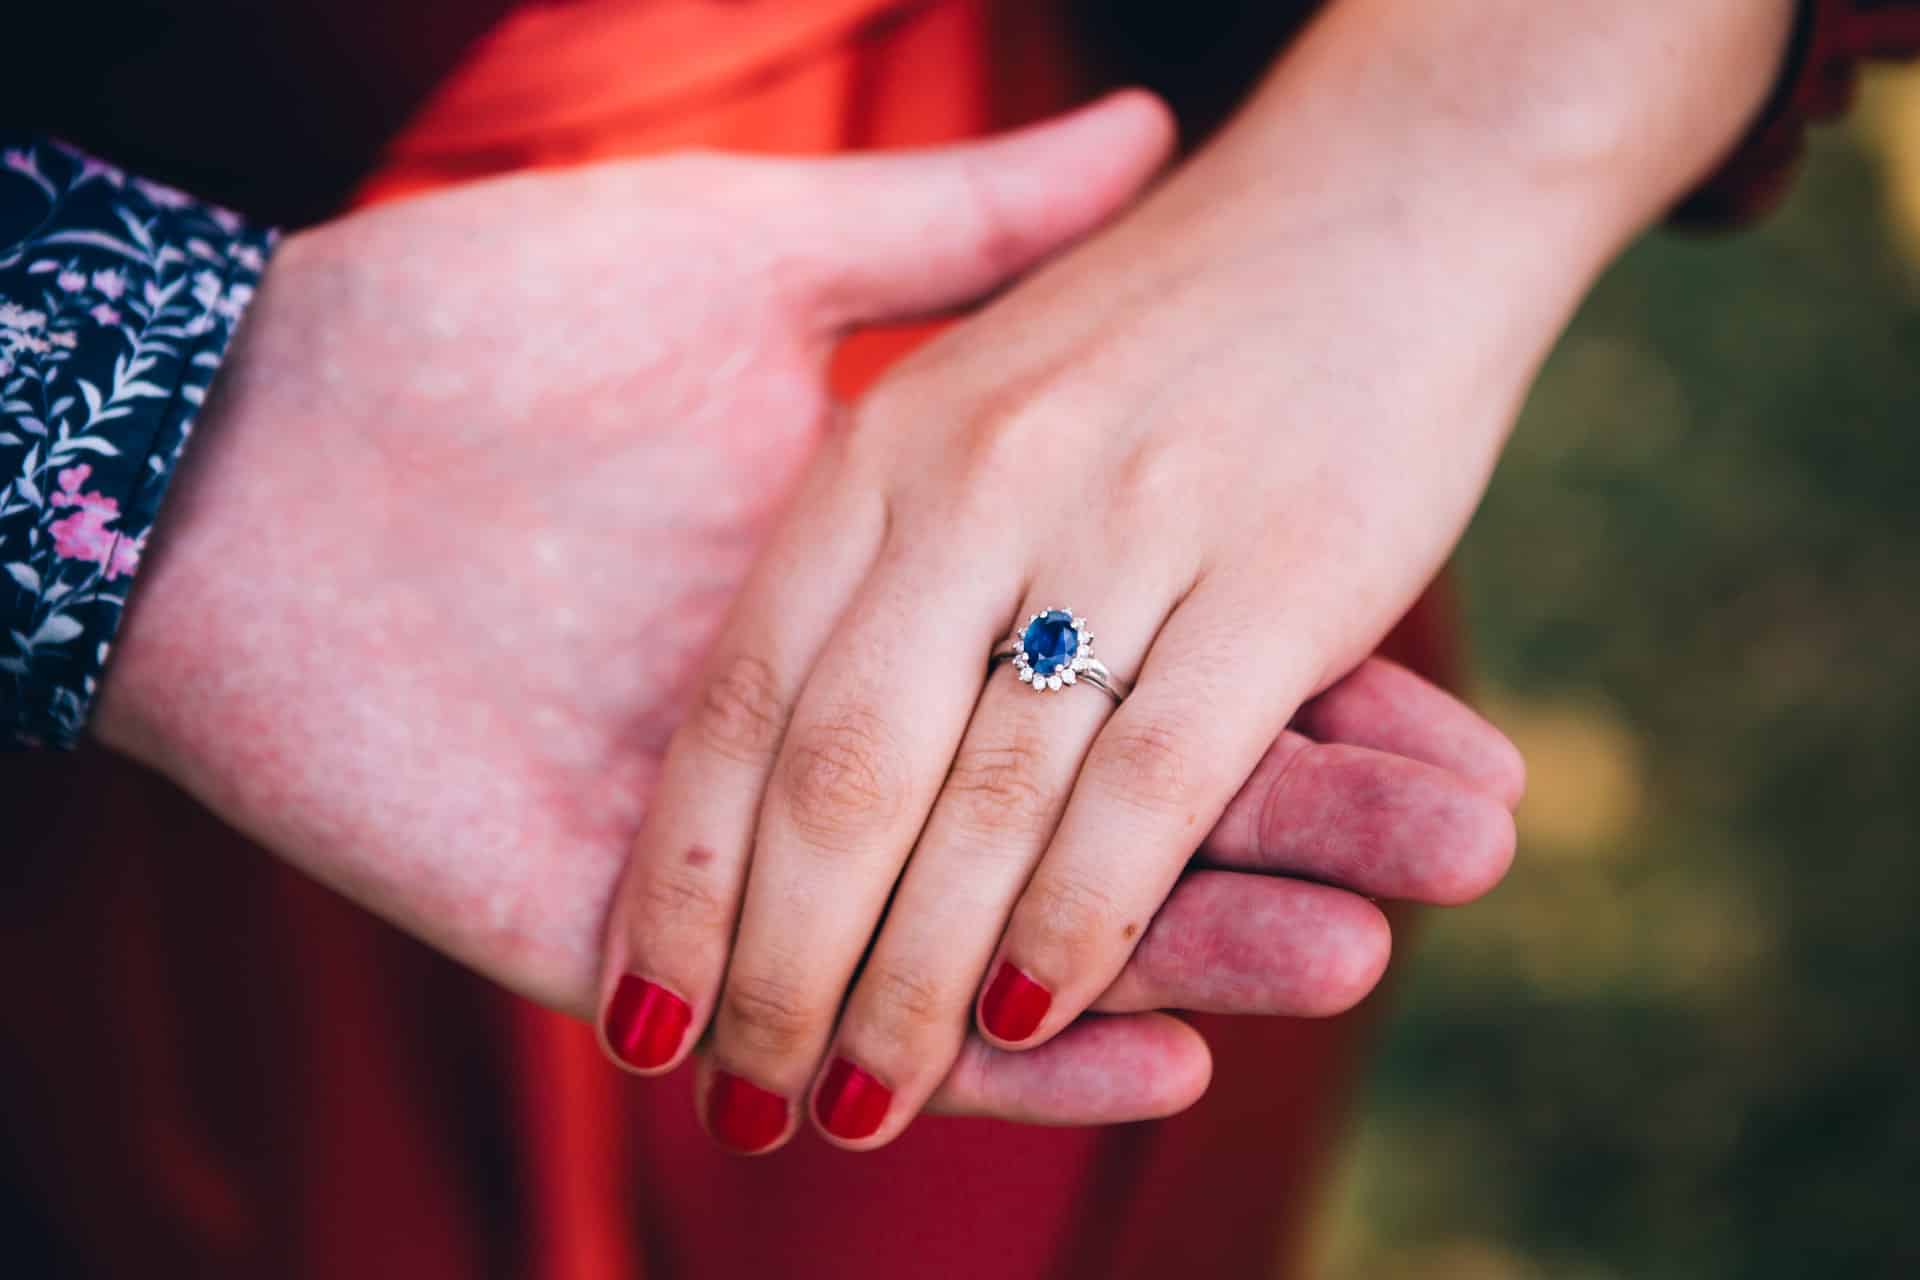 The Sapphire Ring - A Good Alternative To The Popular Diamond Ring